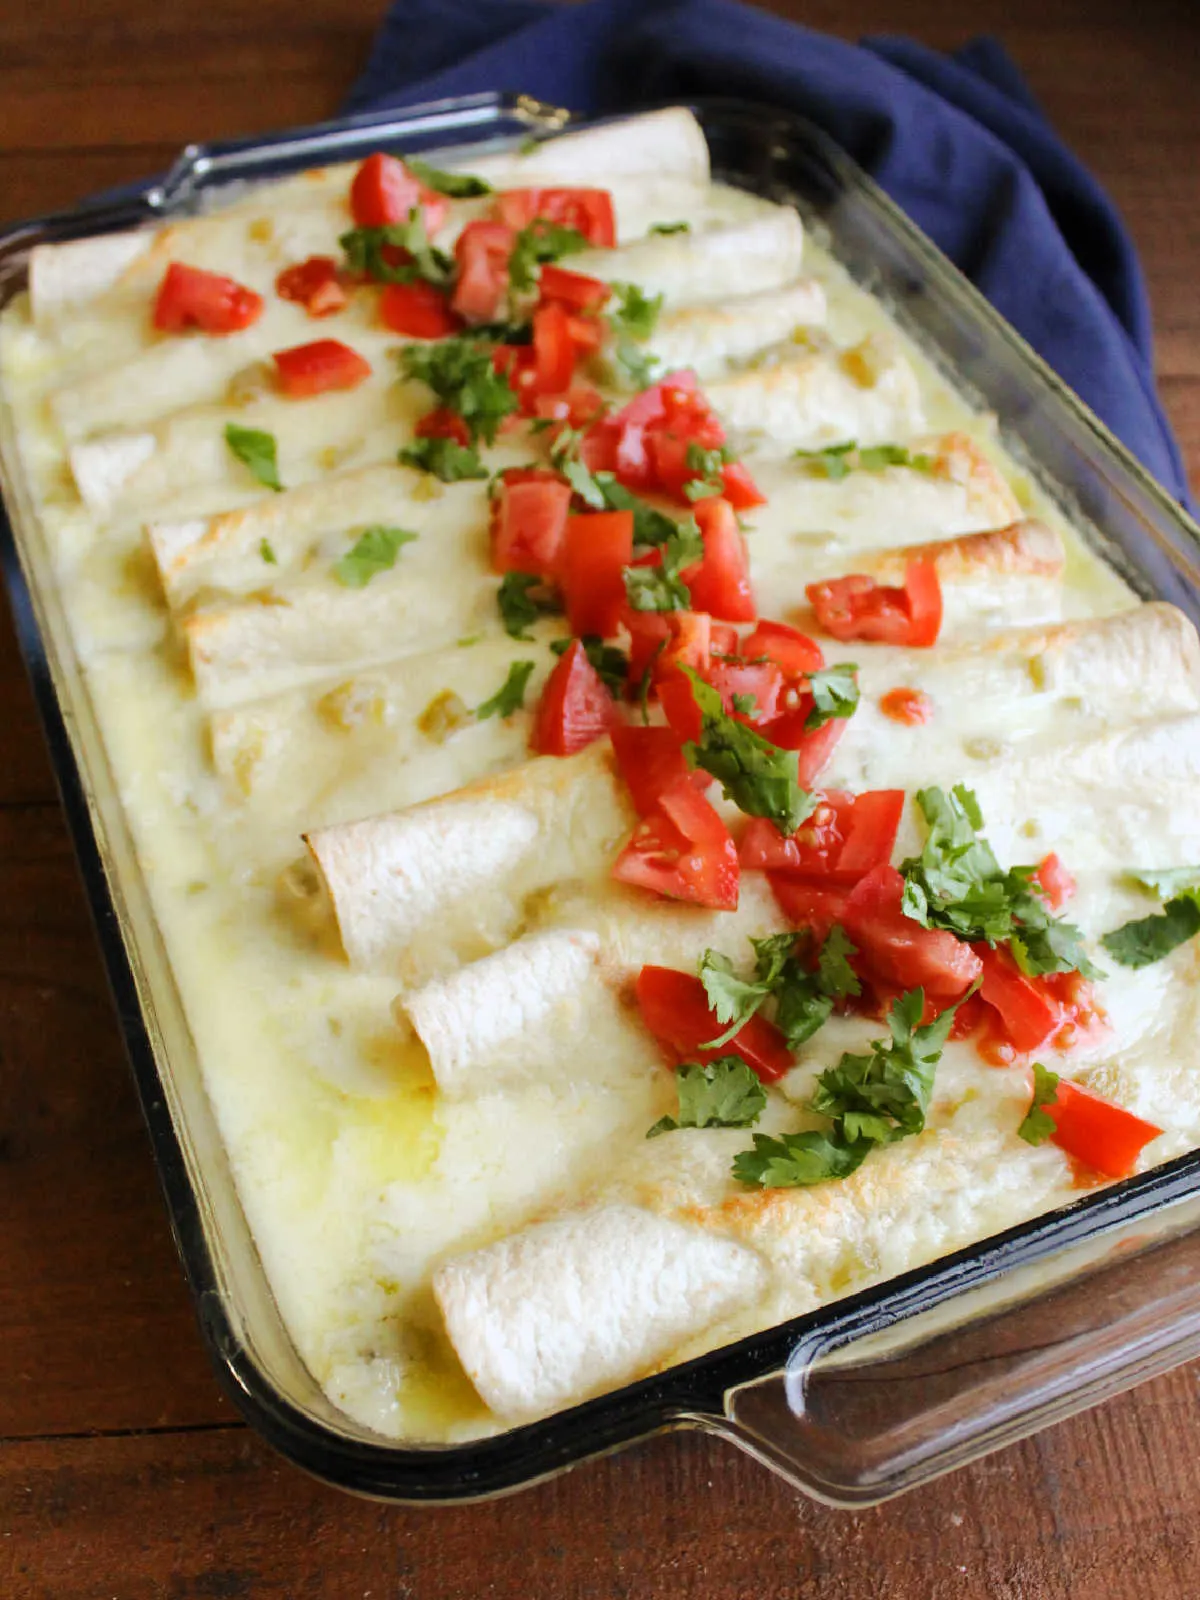 Pan of breakfast enchiladas topped with diced tomato and fresh cilantro, ready to be served.